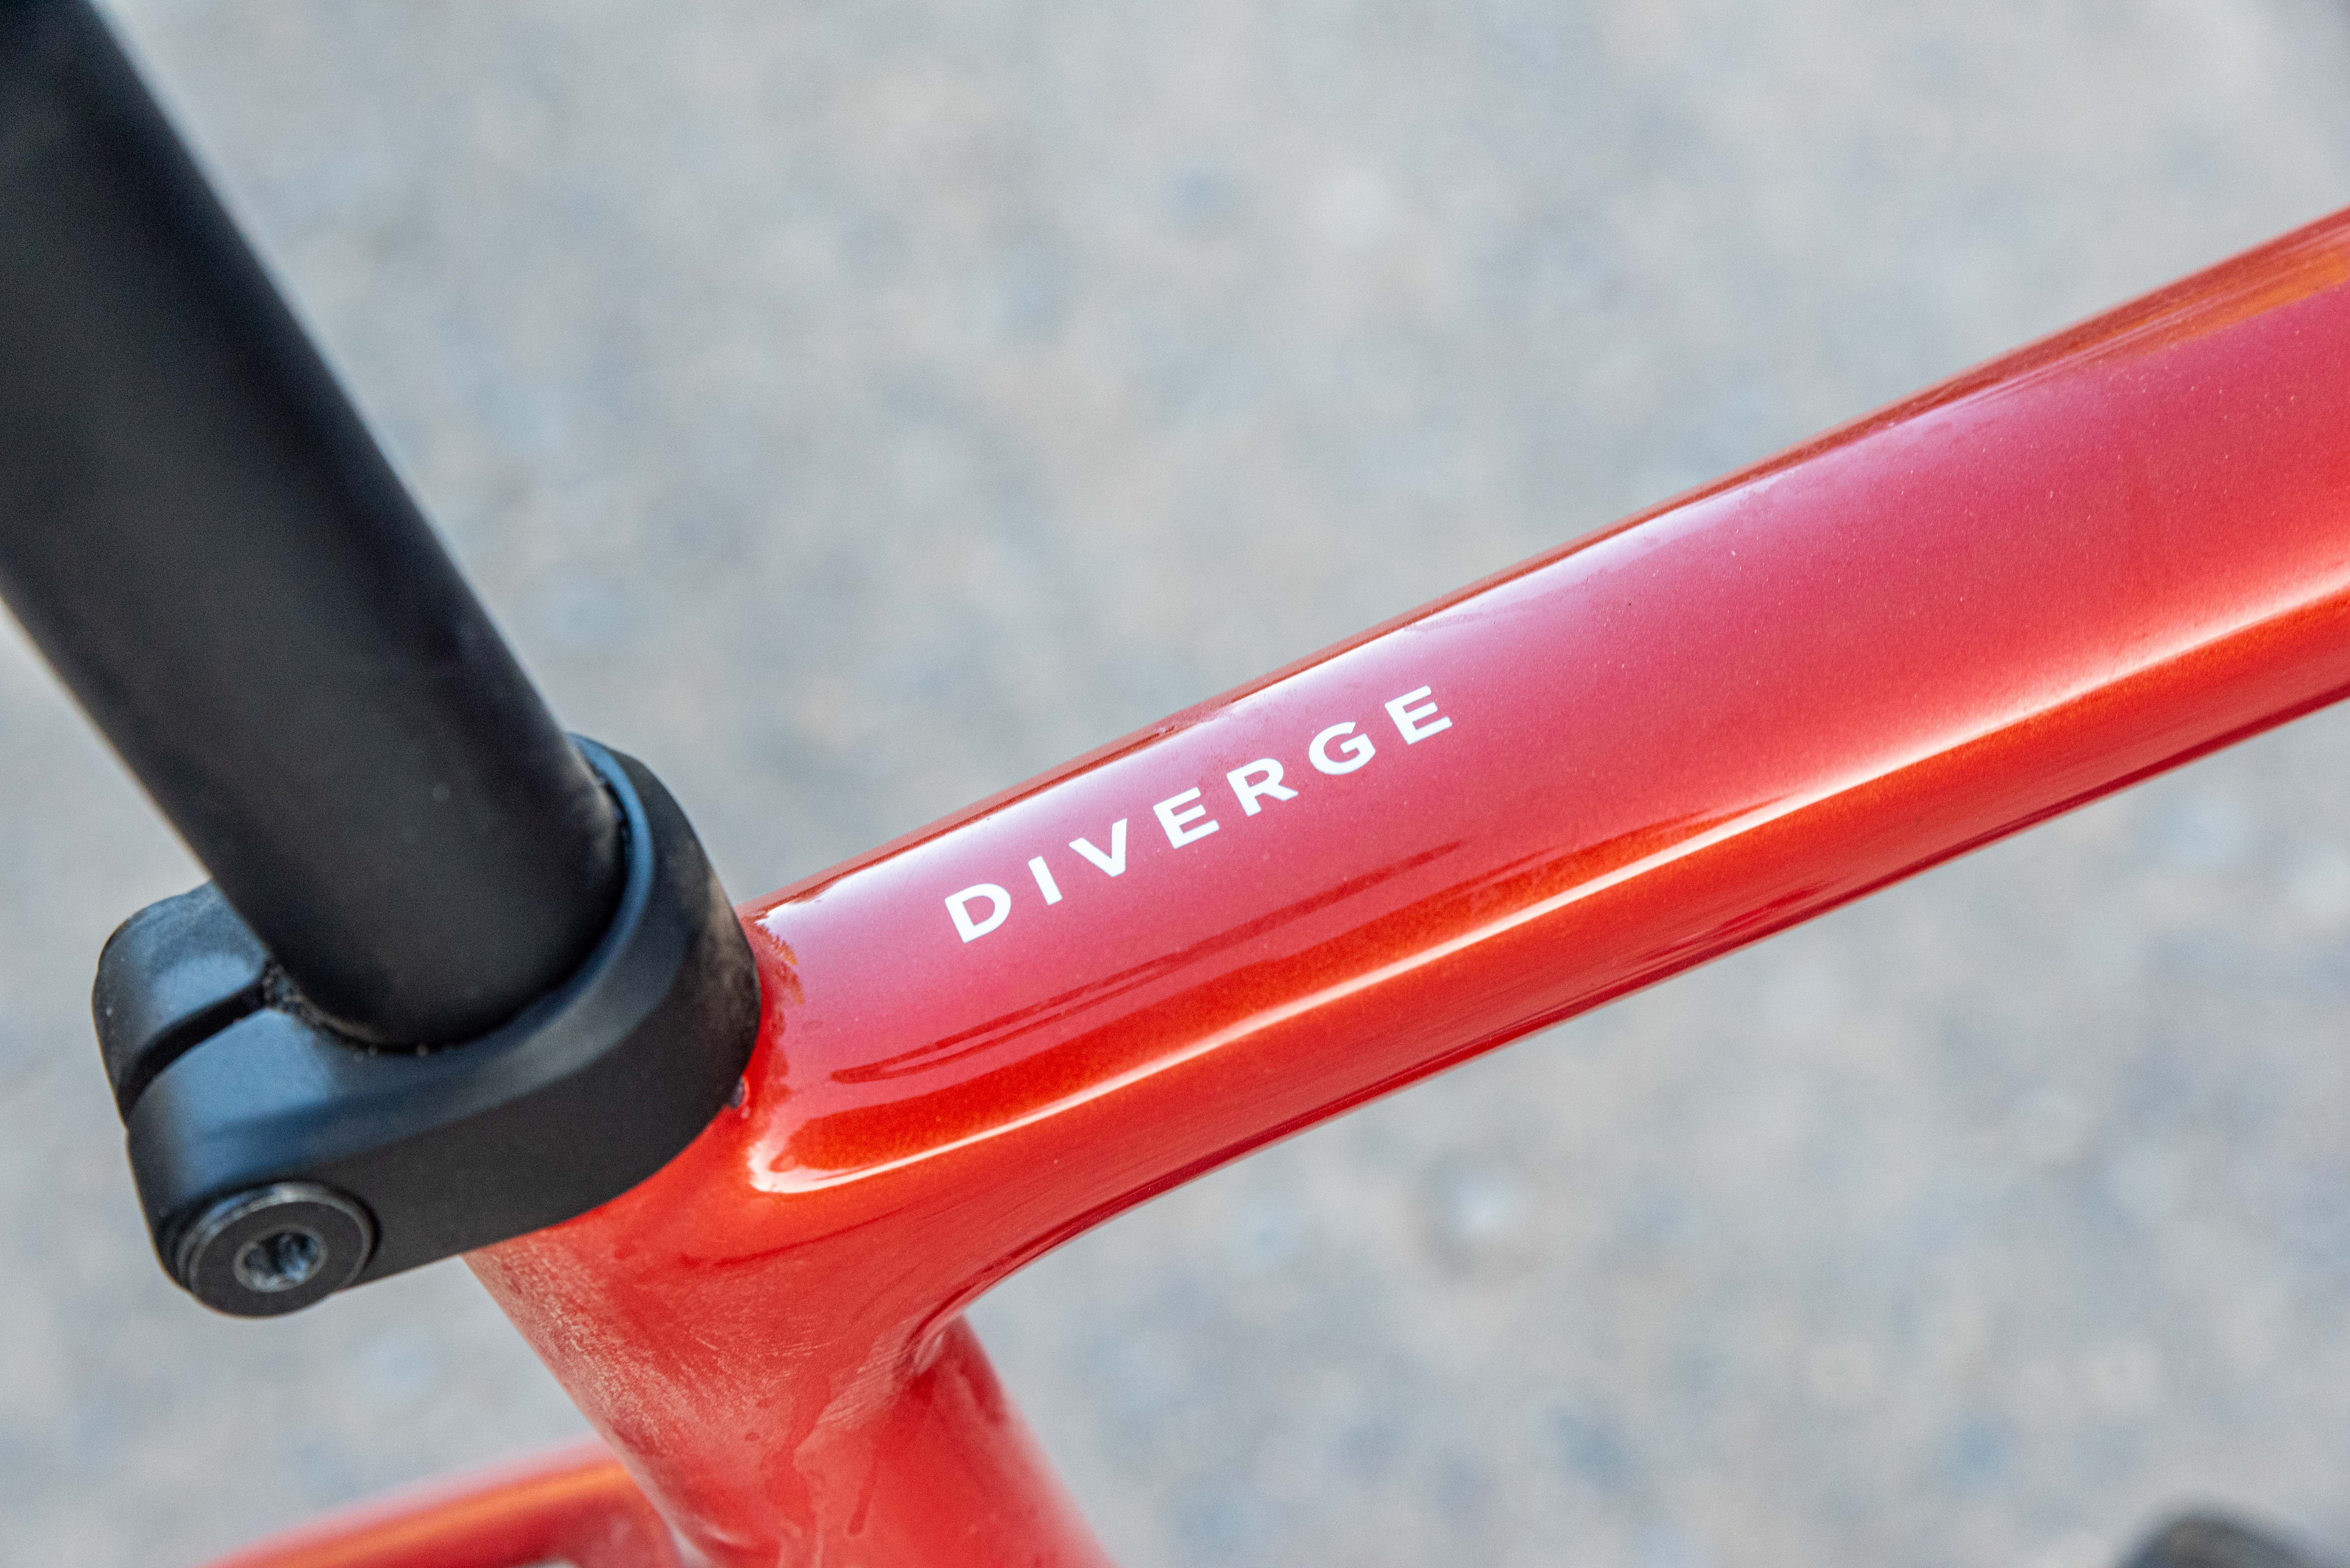 specialized diverge india